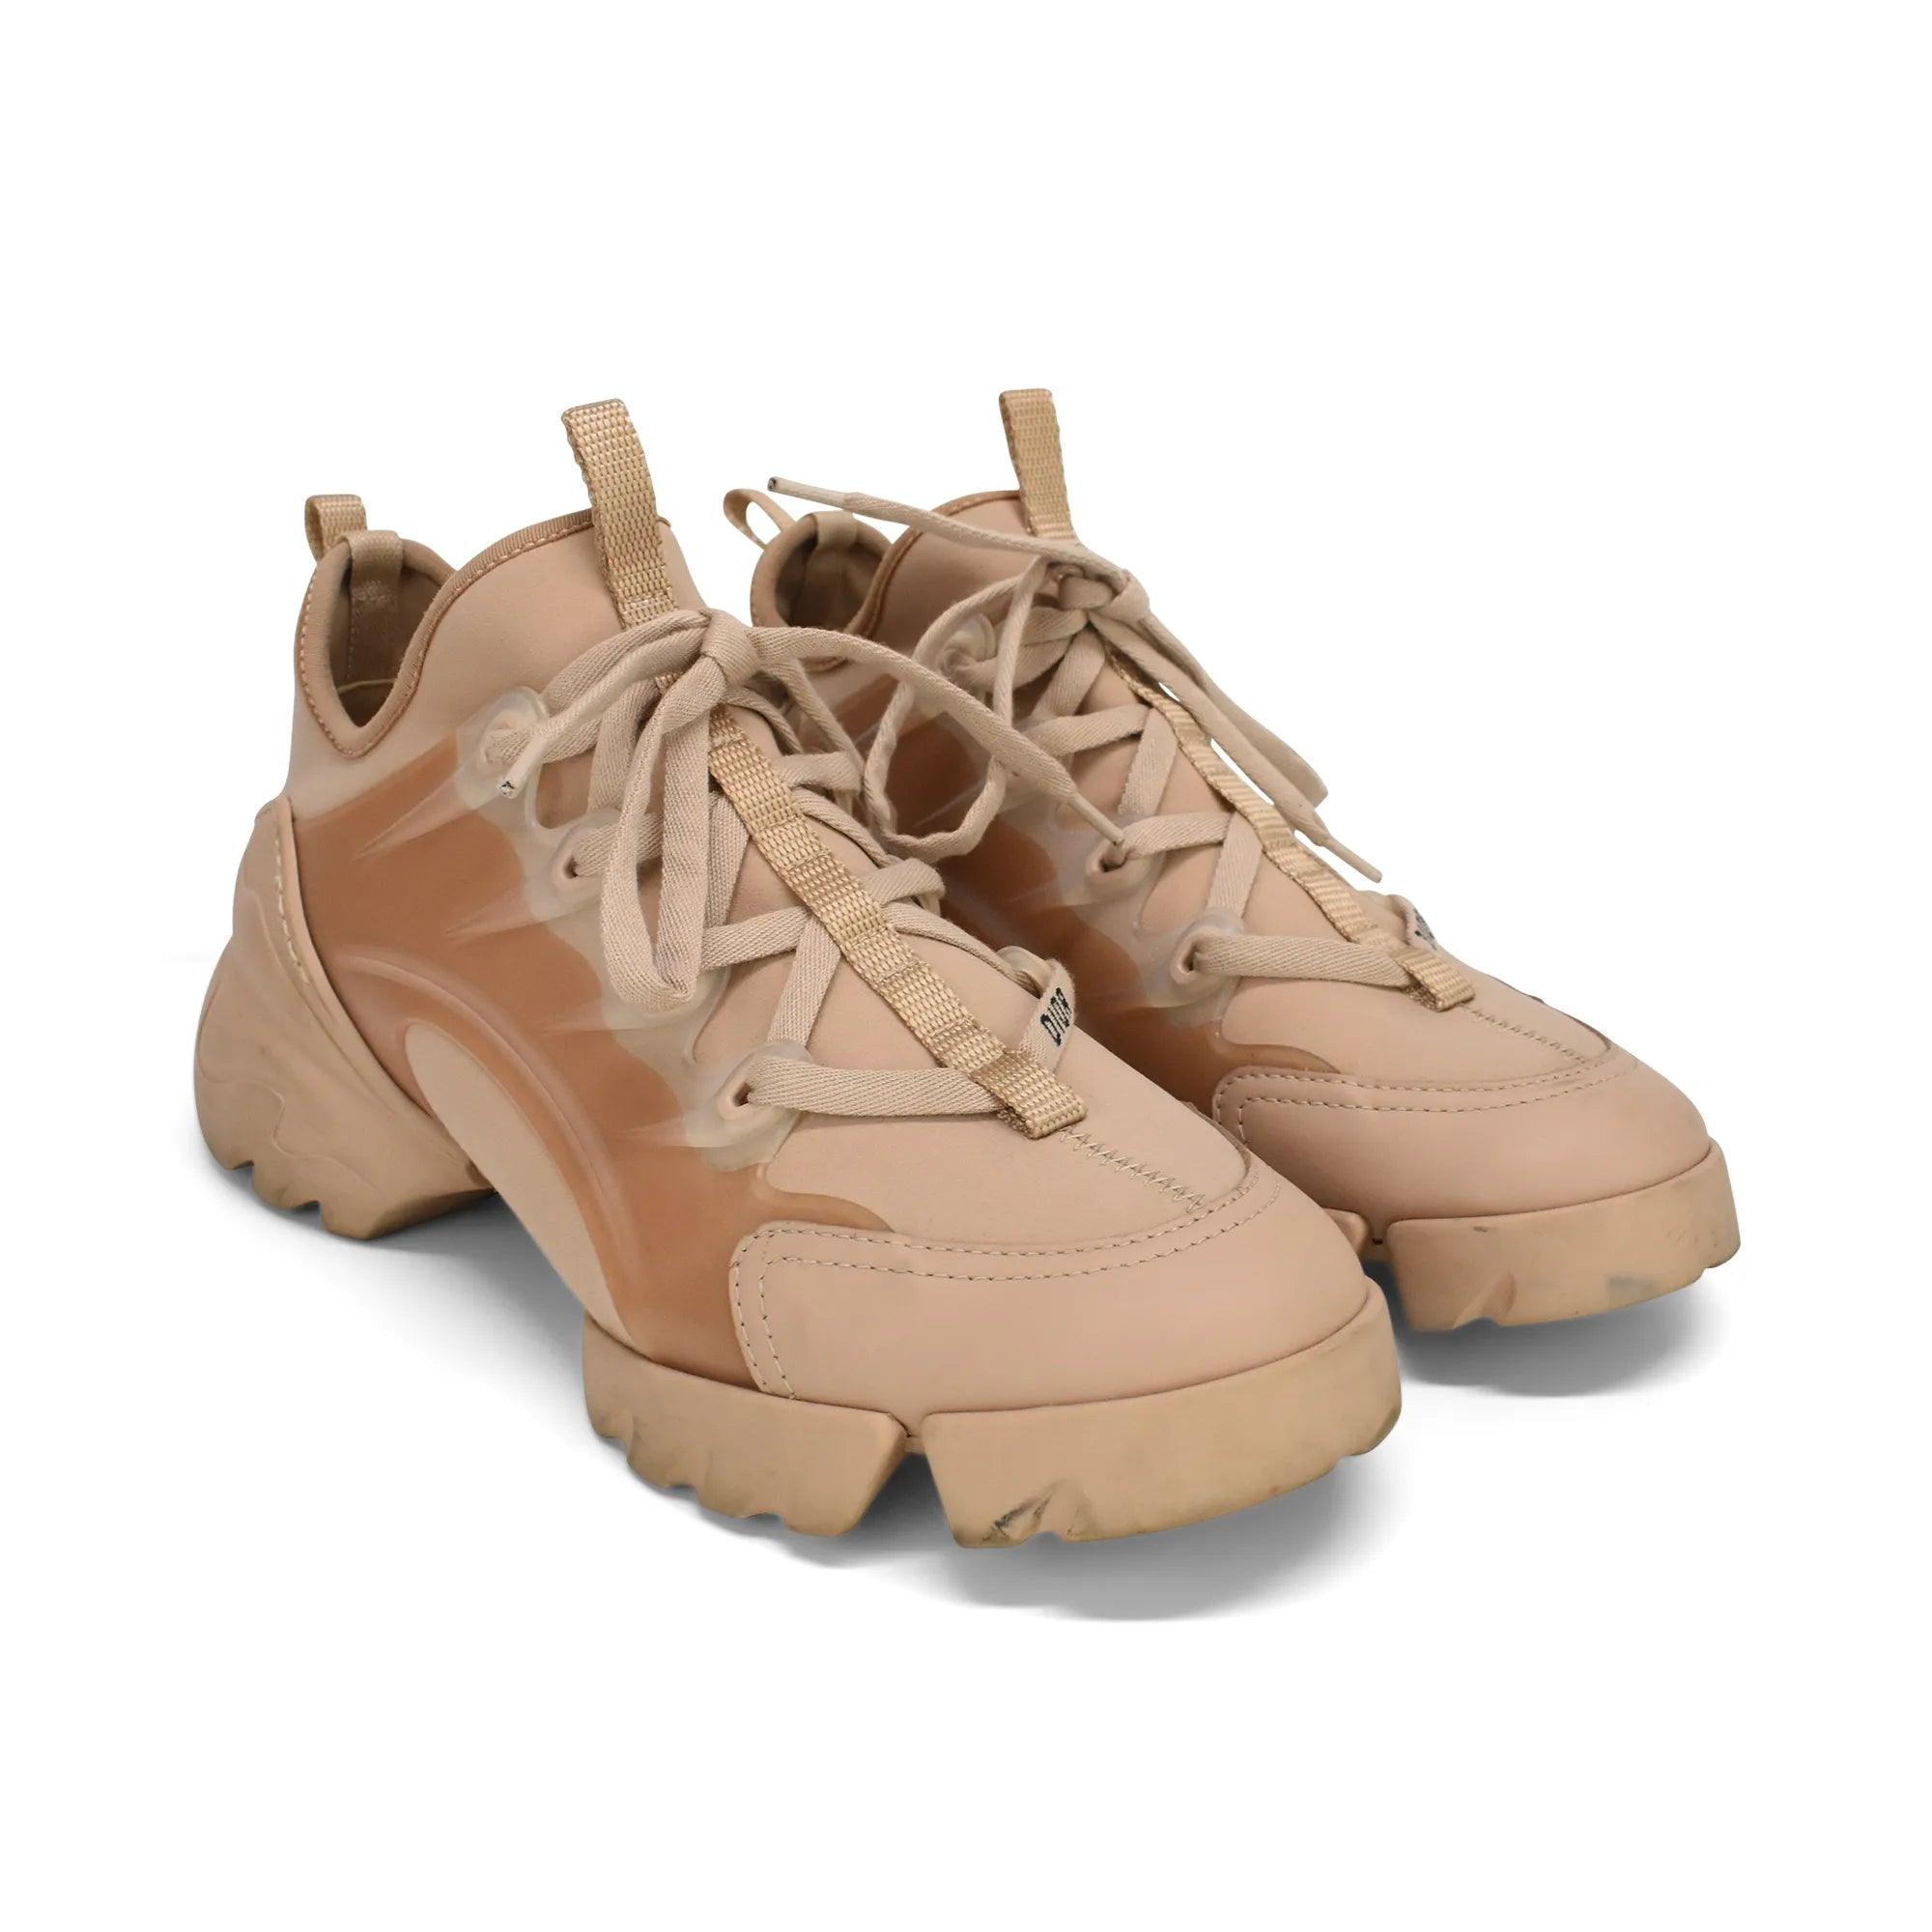 Christian Dior 'D-Connect' Sneakers - Women's 38 - Fashionably Yours